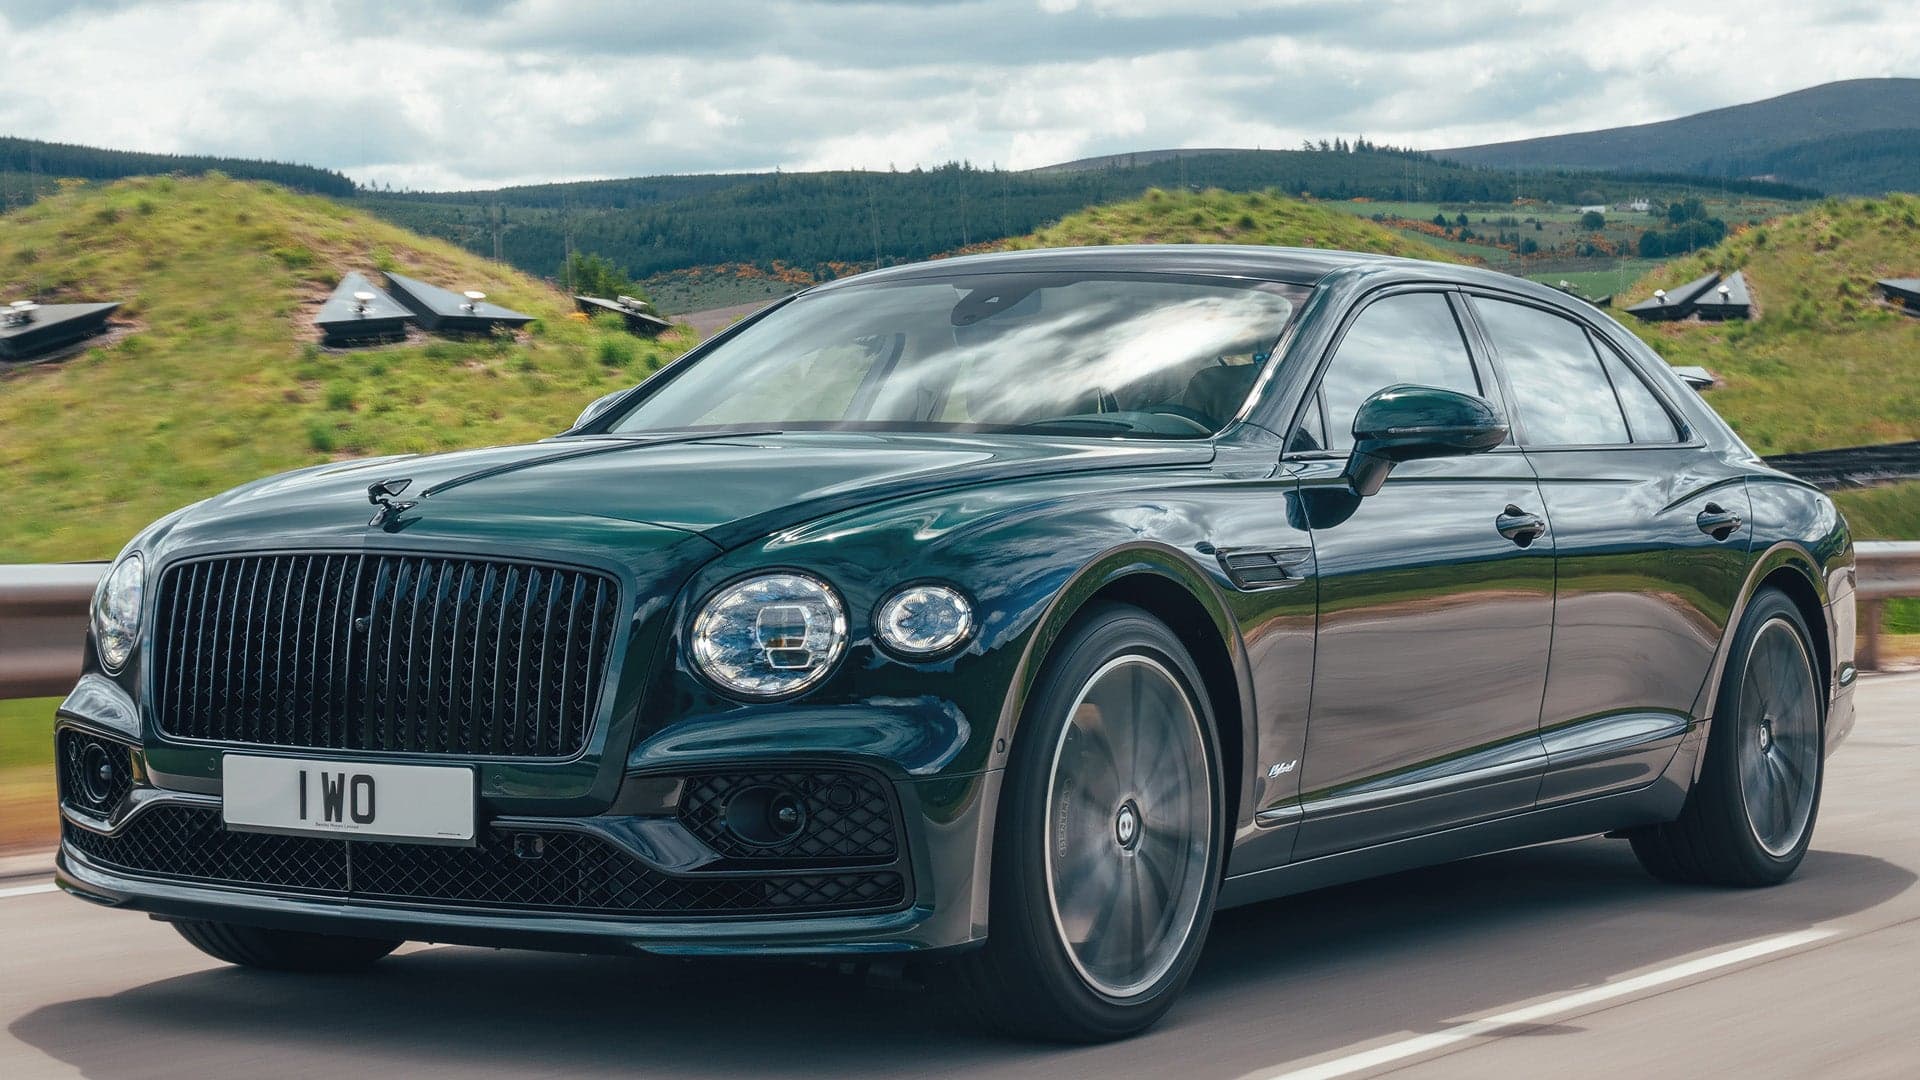 2022 Bentley Flying Spur Hybrid: 536 HP Combined From an Electrified V6